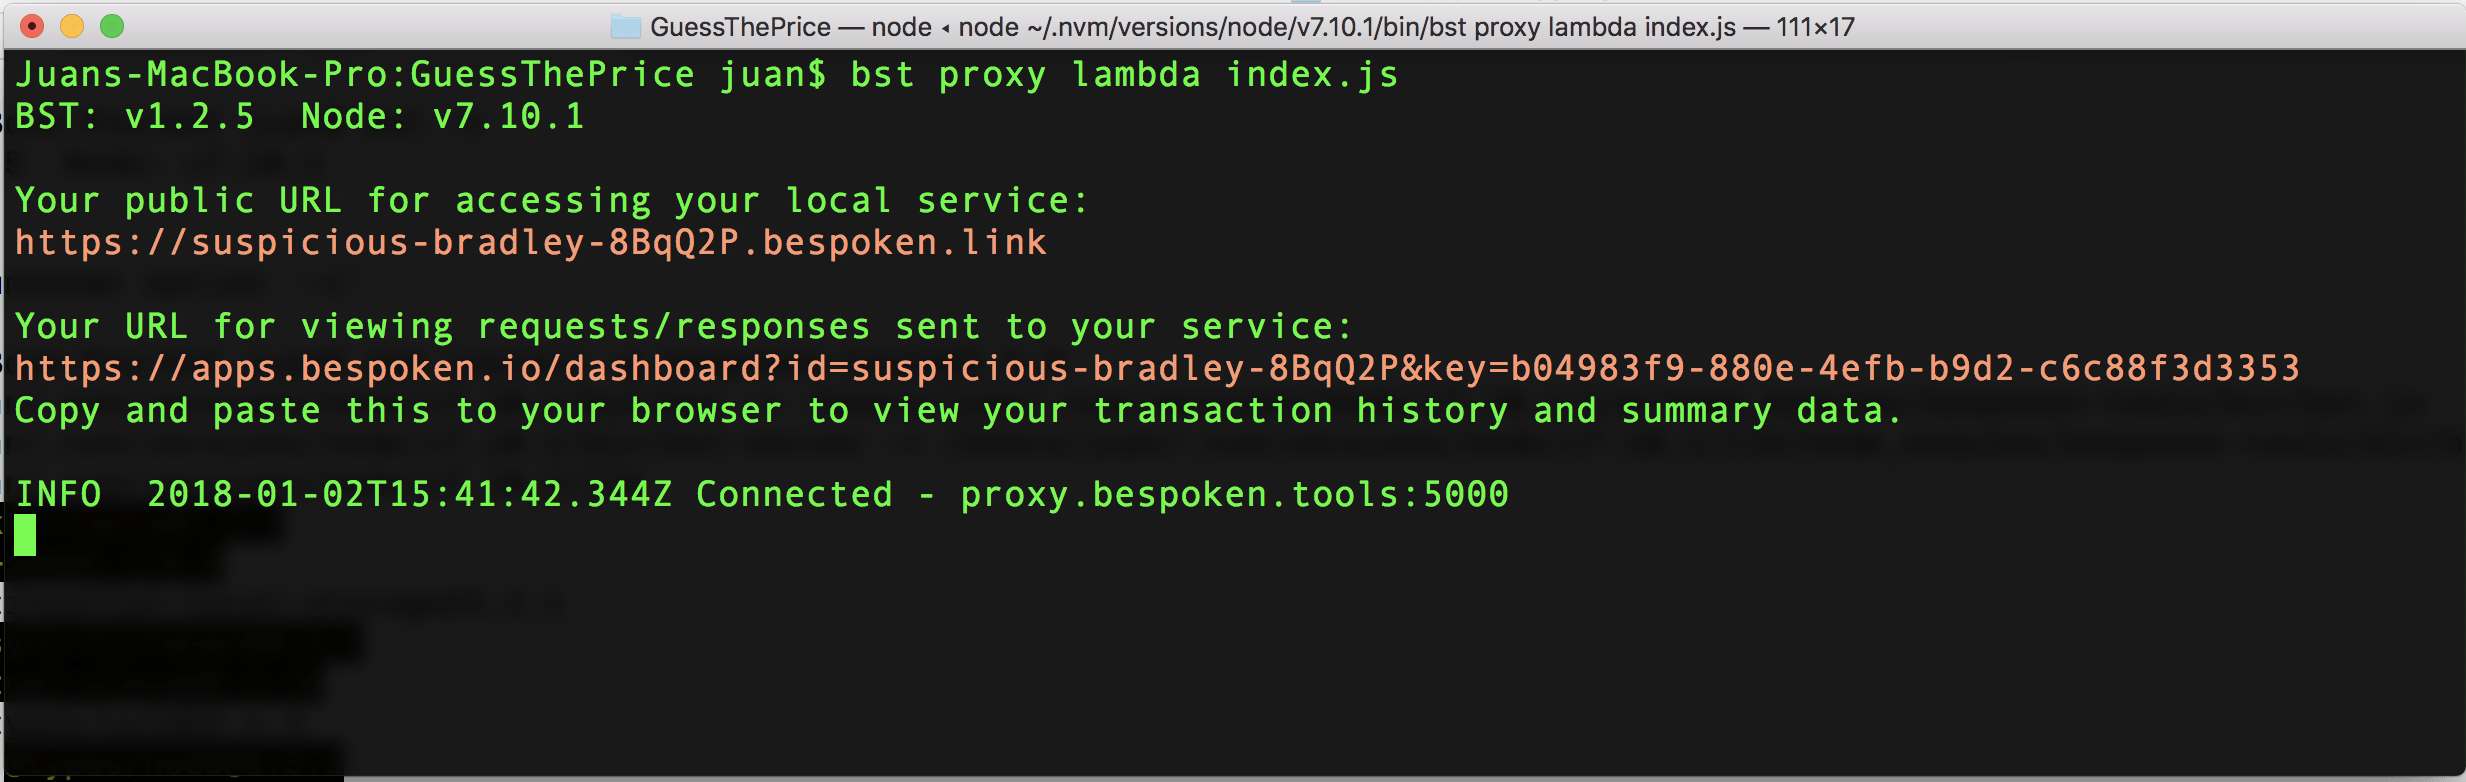 Bespoken Proxy After Image